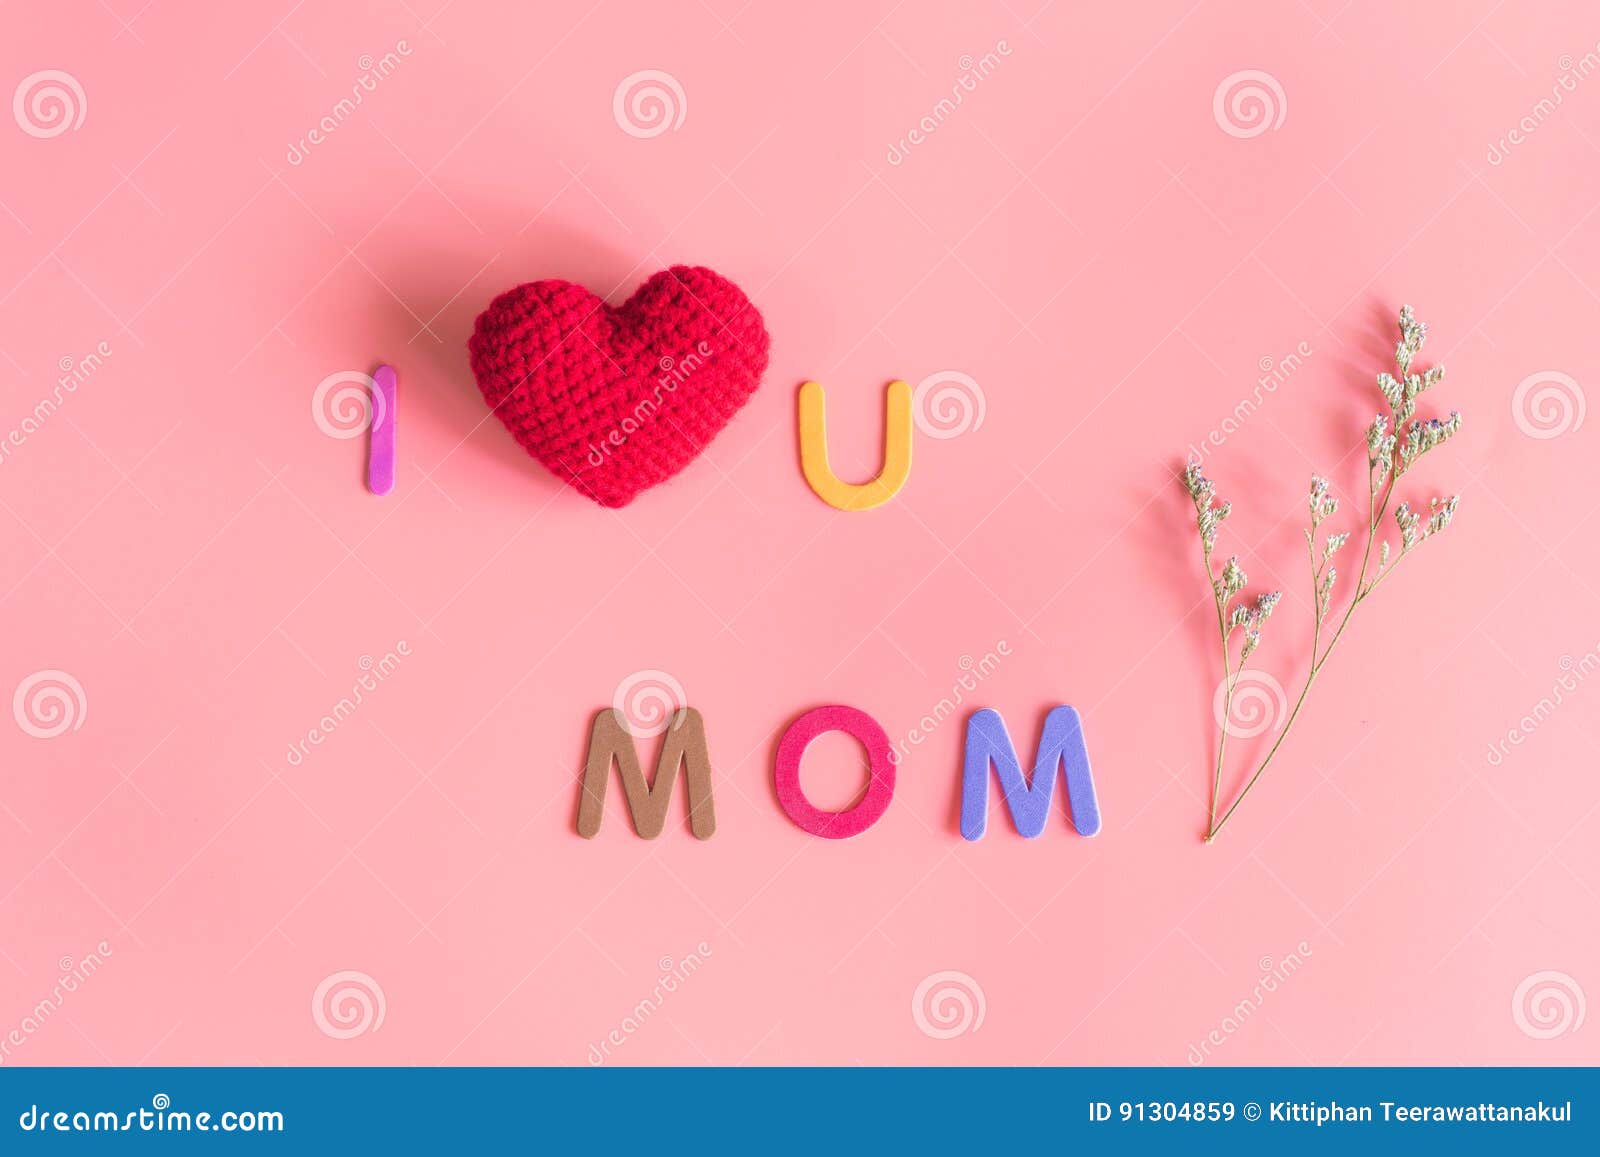 I Love U Mom Message with Flowe Stock Image - Image of card ...